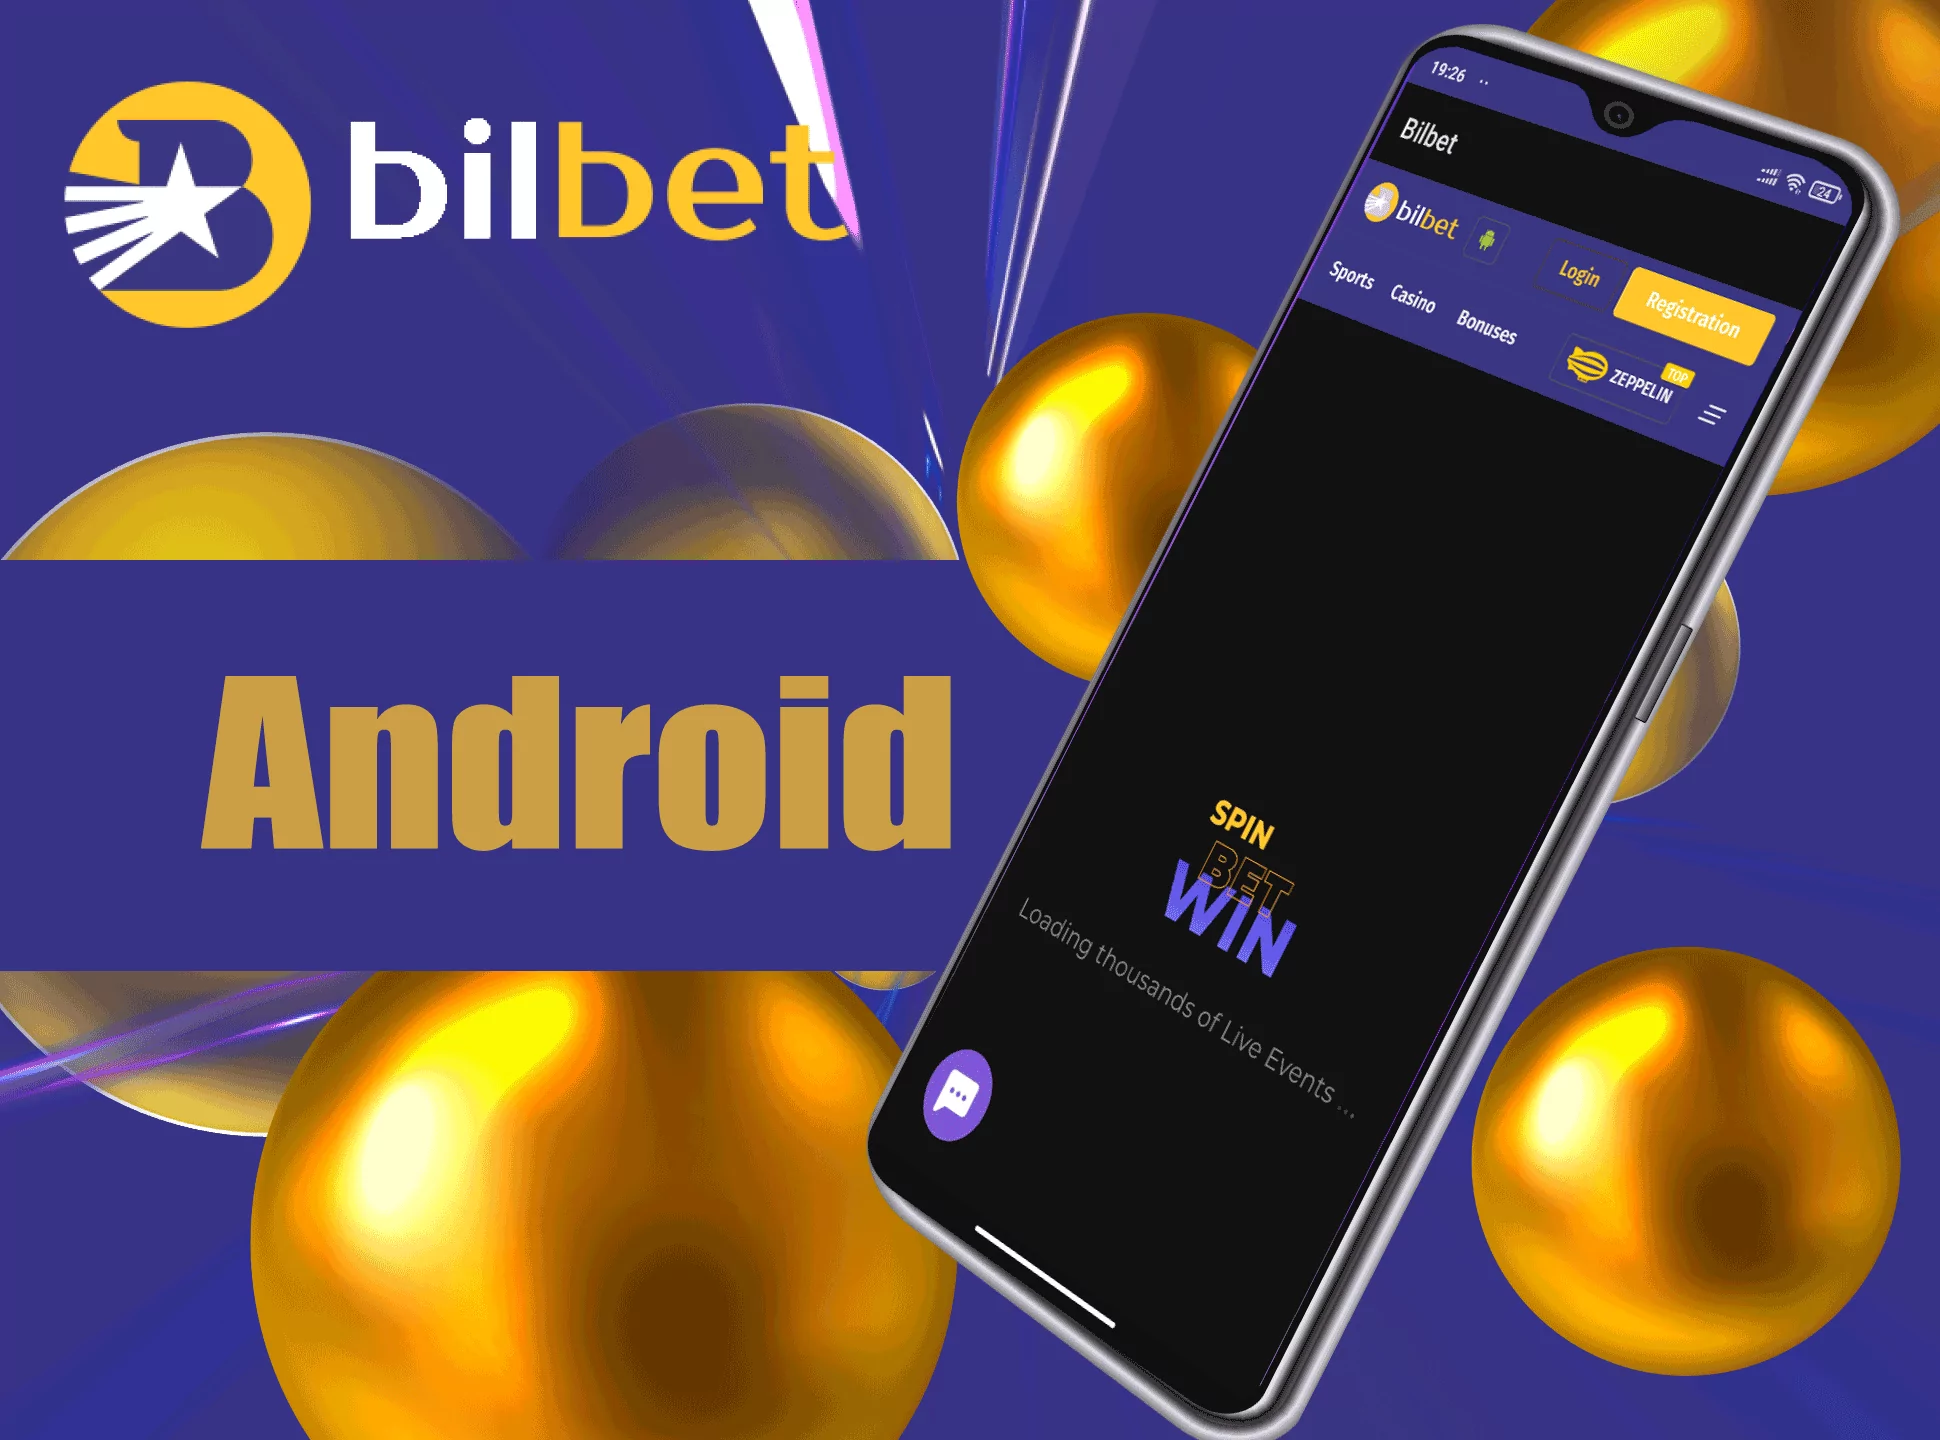 Open the app and sign up for Bilbet.